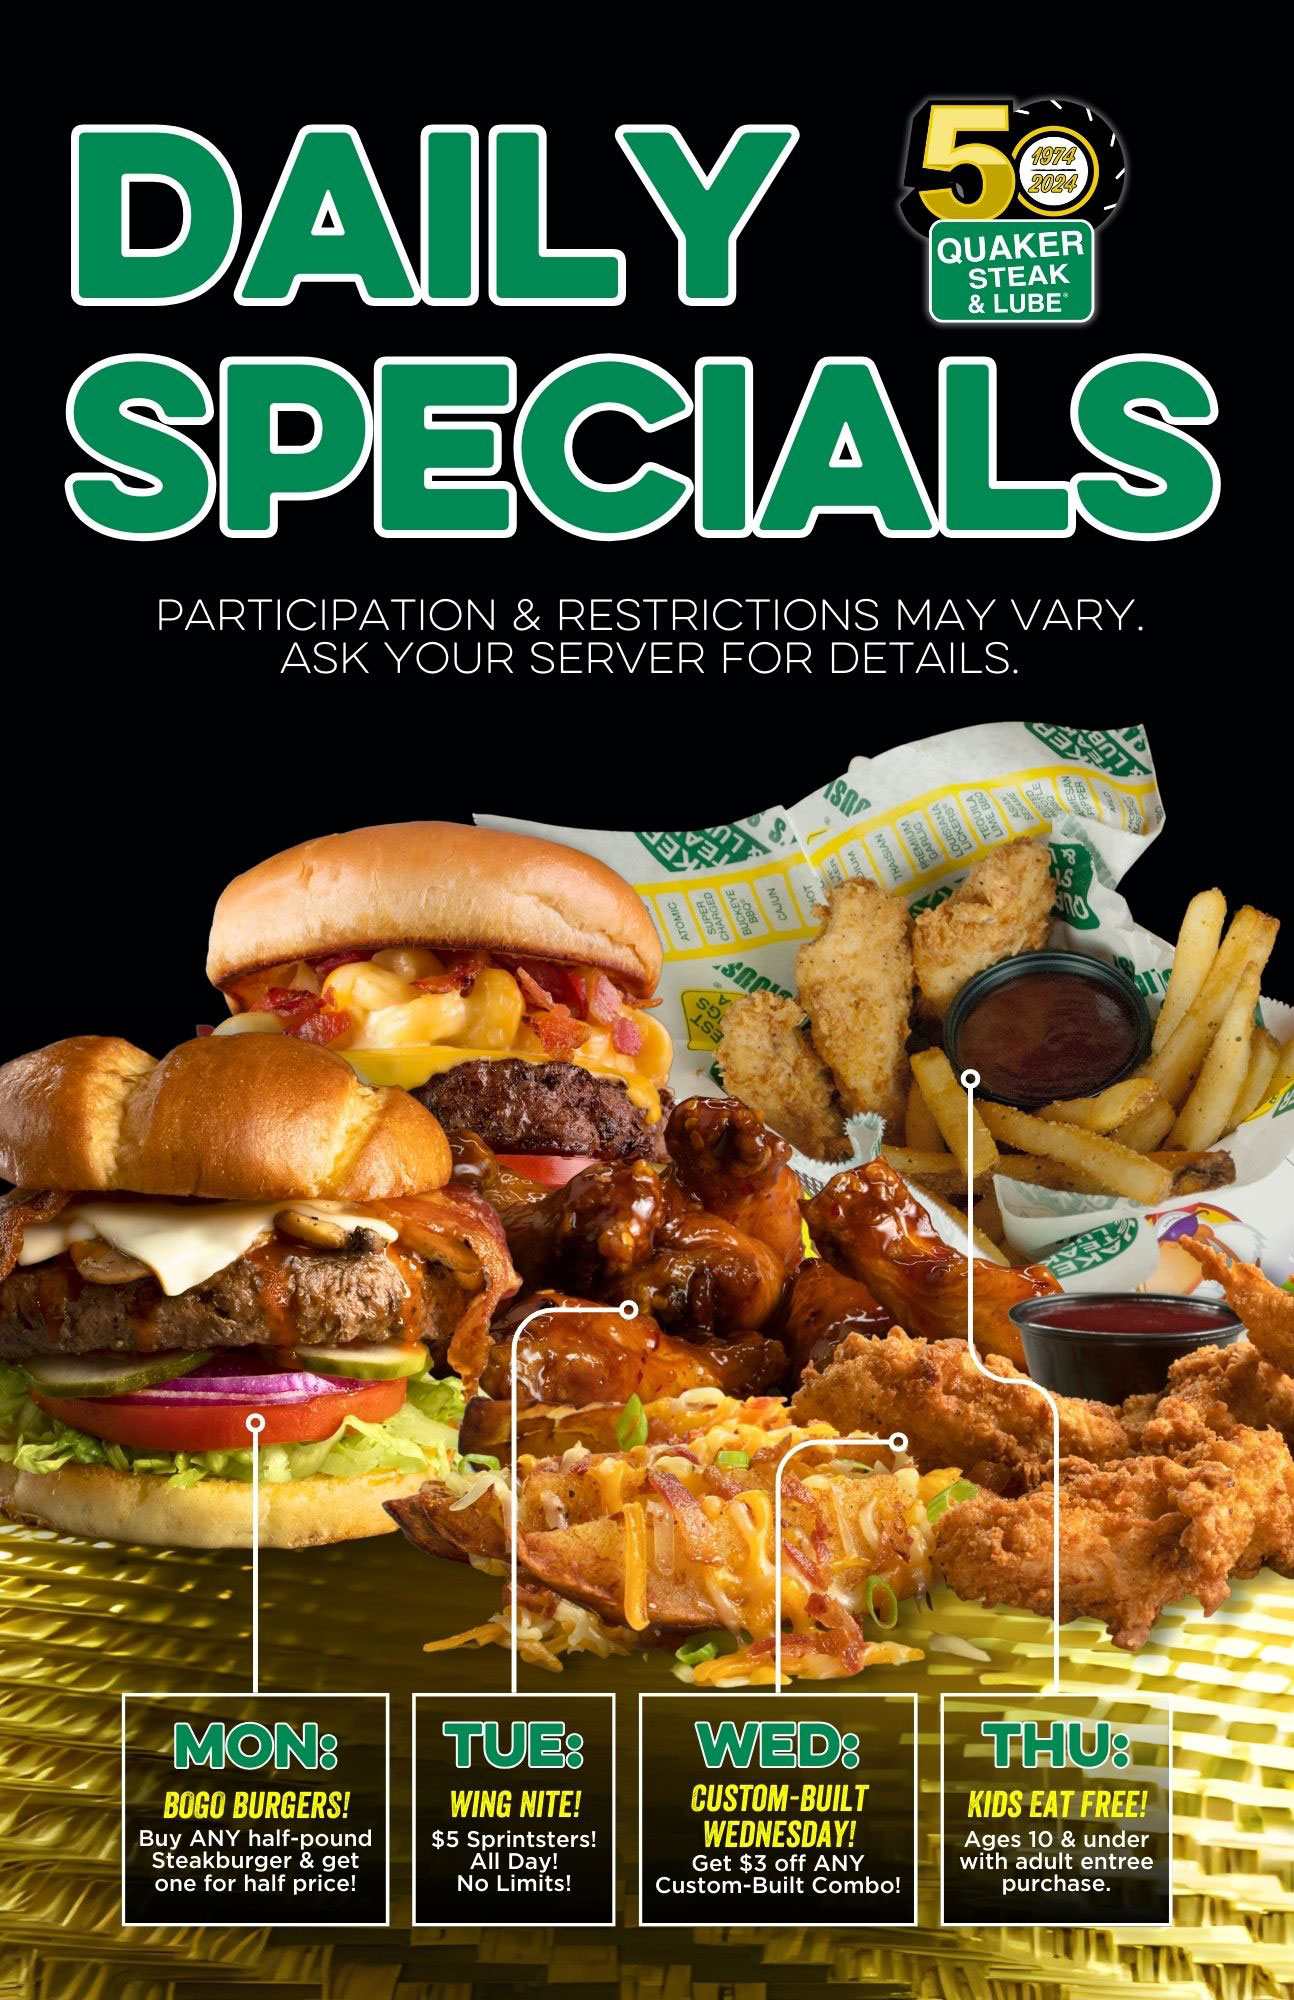 Daily Specials At the Quaker Steak & Lube Sharon Restaurant